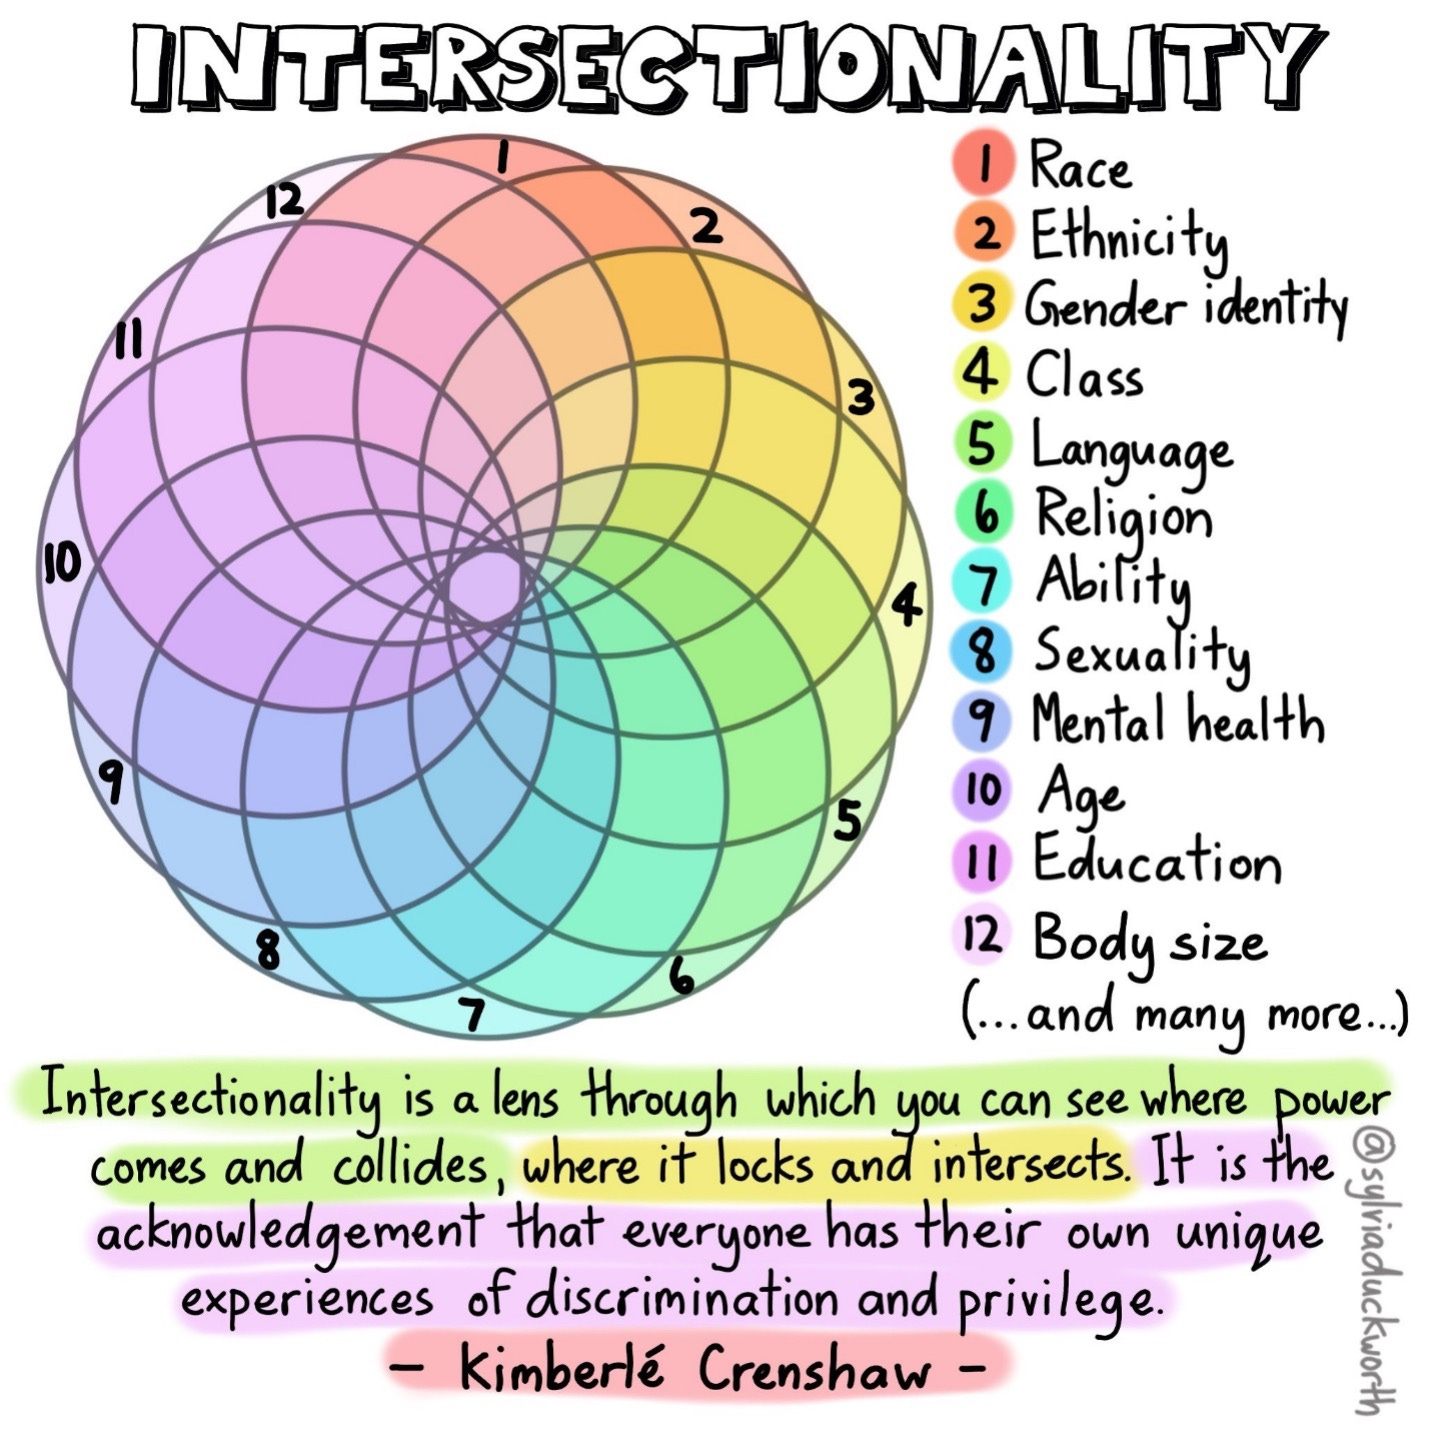 Intersectionality is a lens through which you can see where power comes and colliedes, where it locks and intersects. It is the acknowledgement that everyone hasthere own unique expereinces of discrimination and privilege.